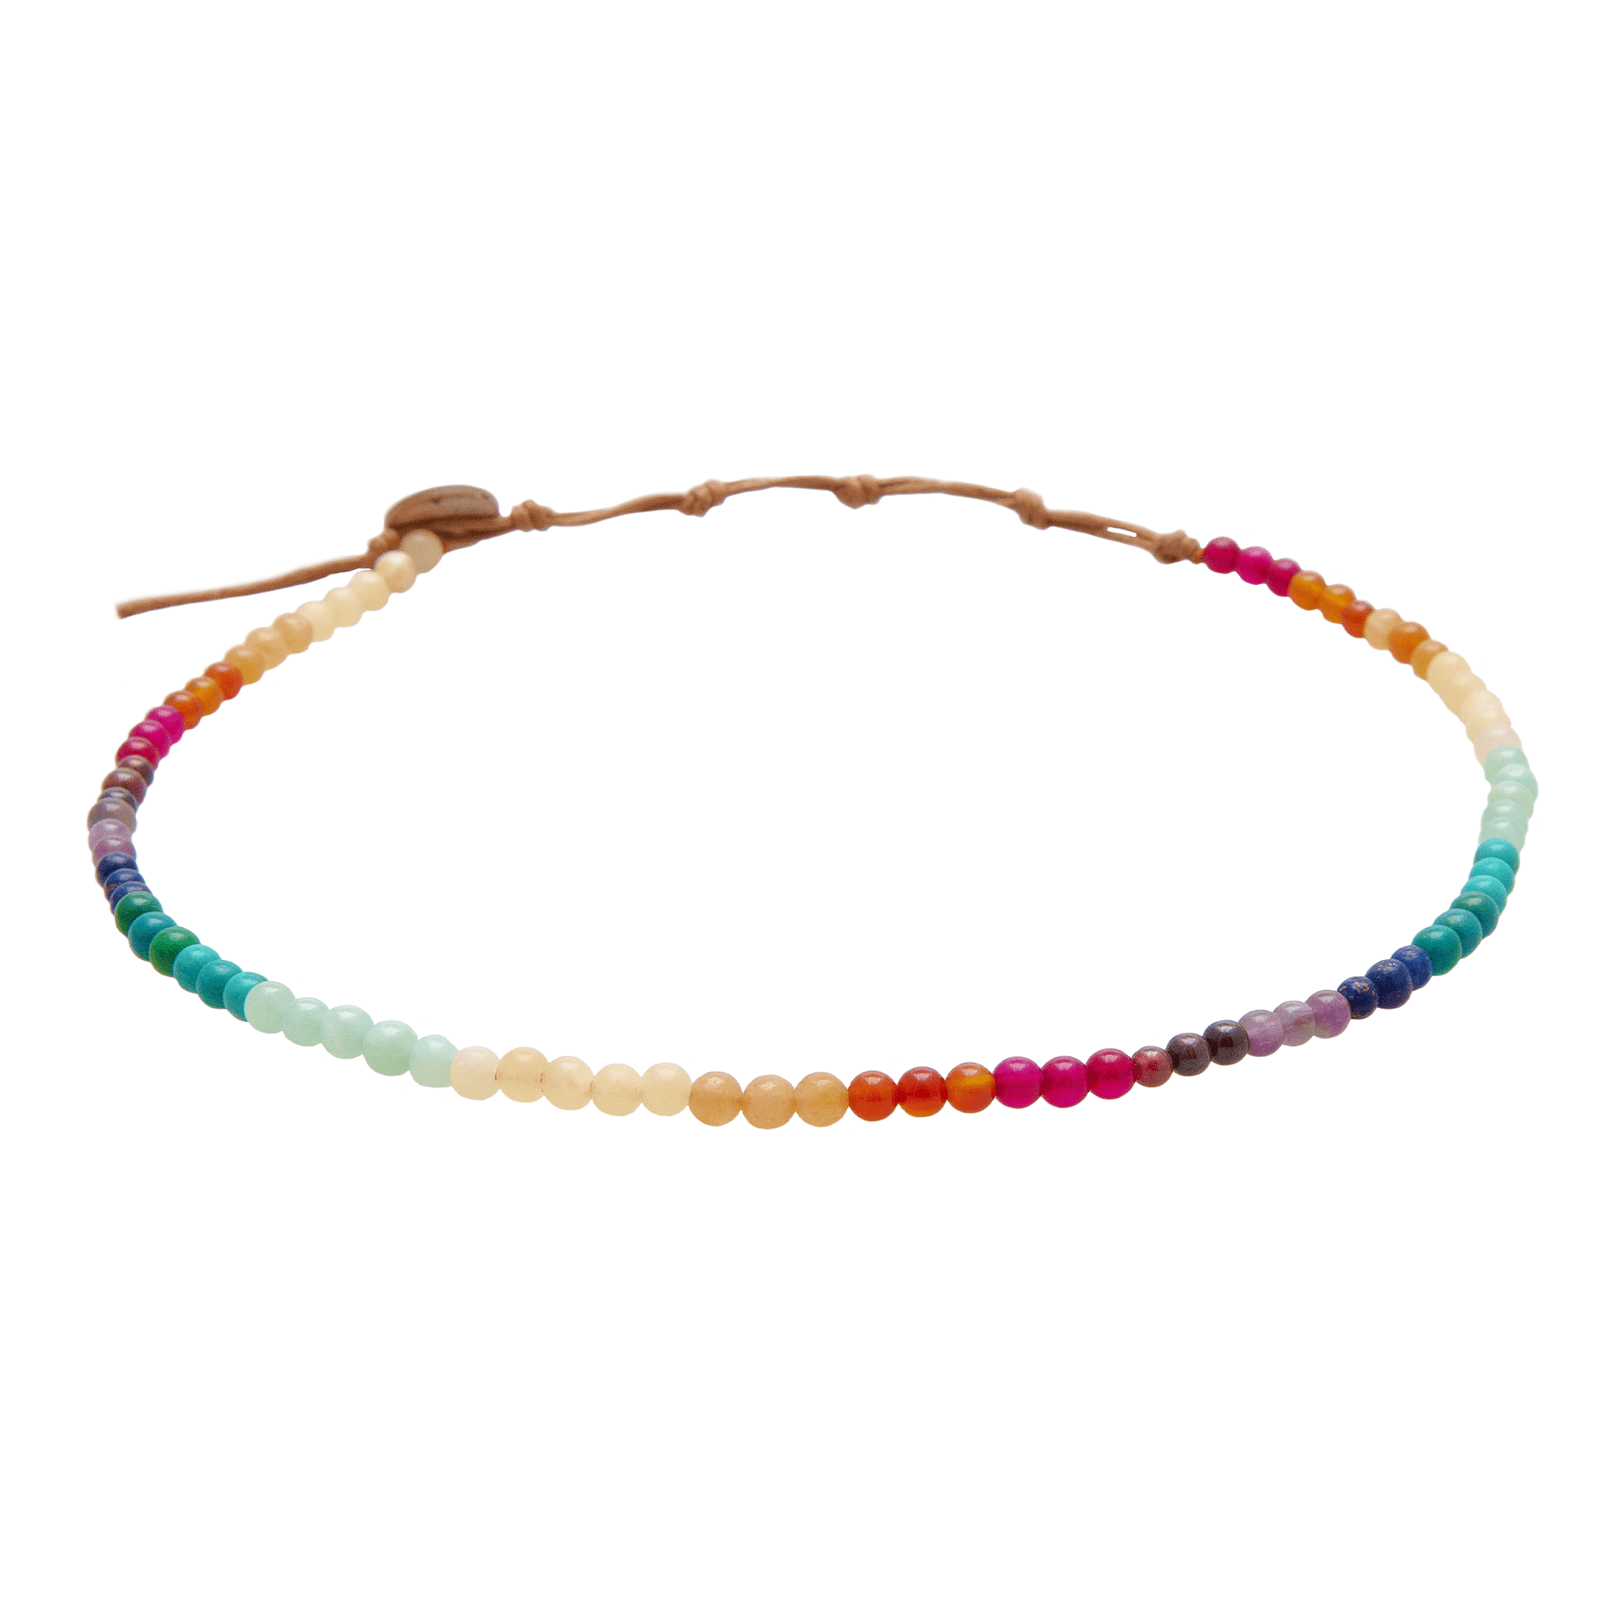 4mm multicolor stone healing necklace with a coconut button closure